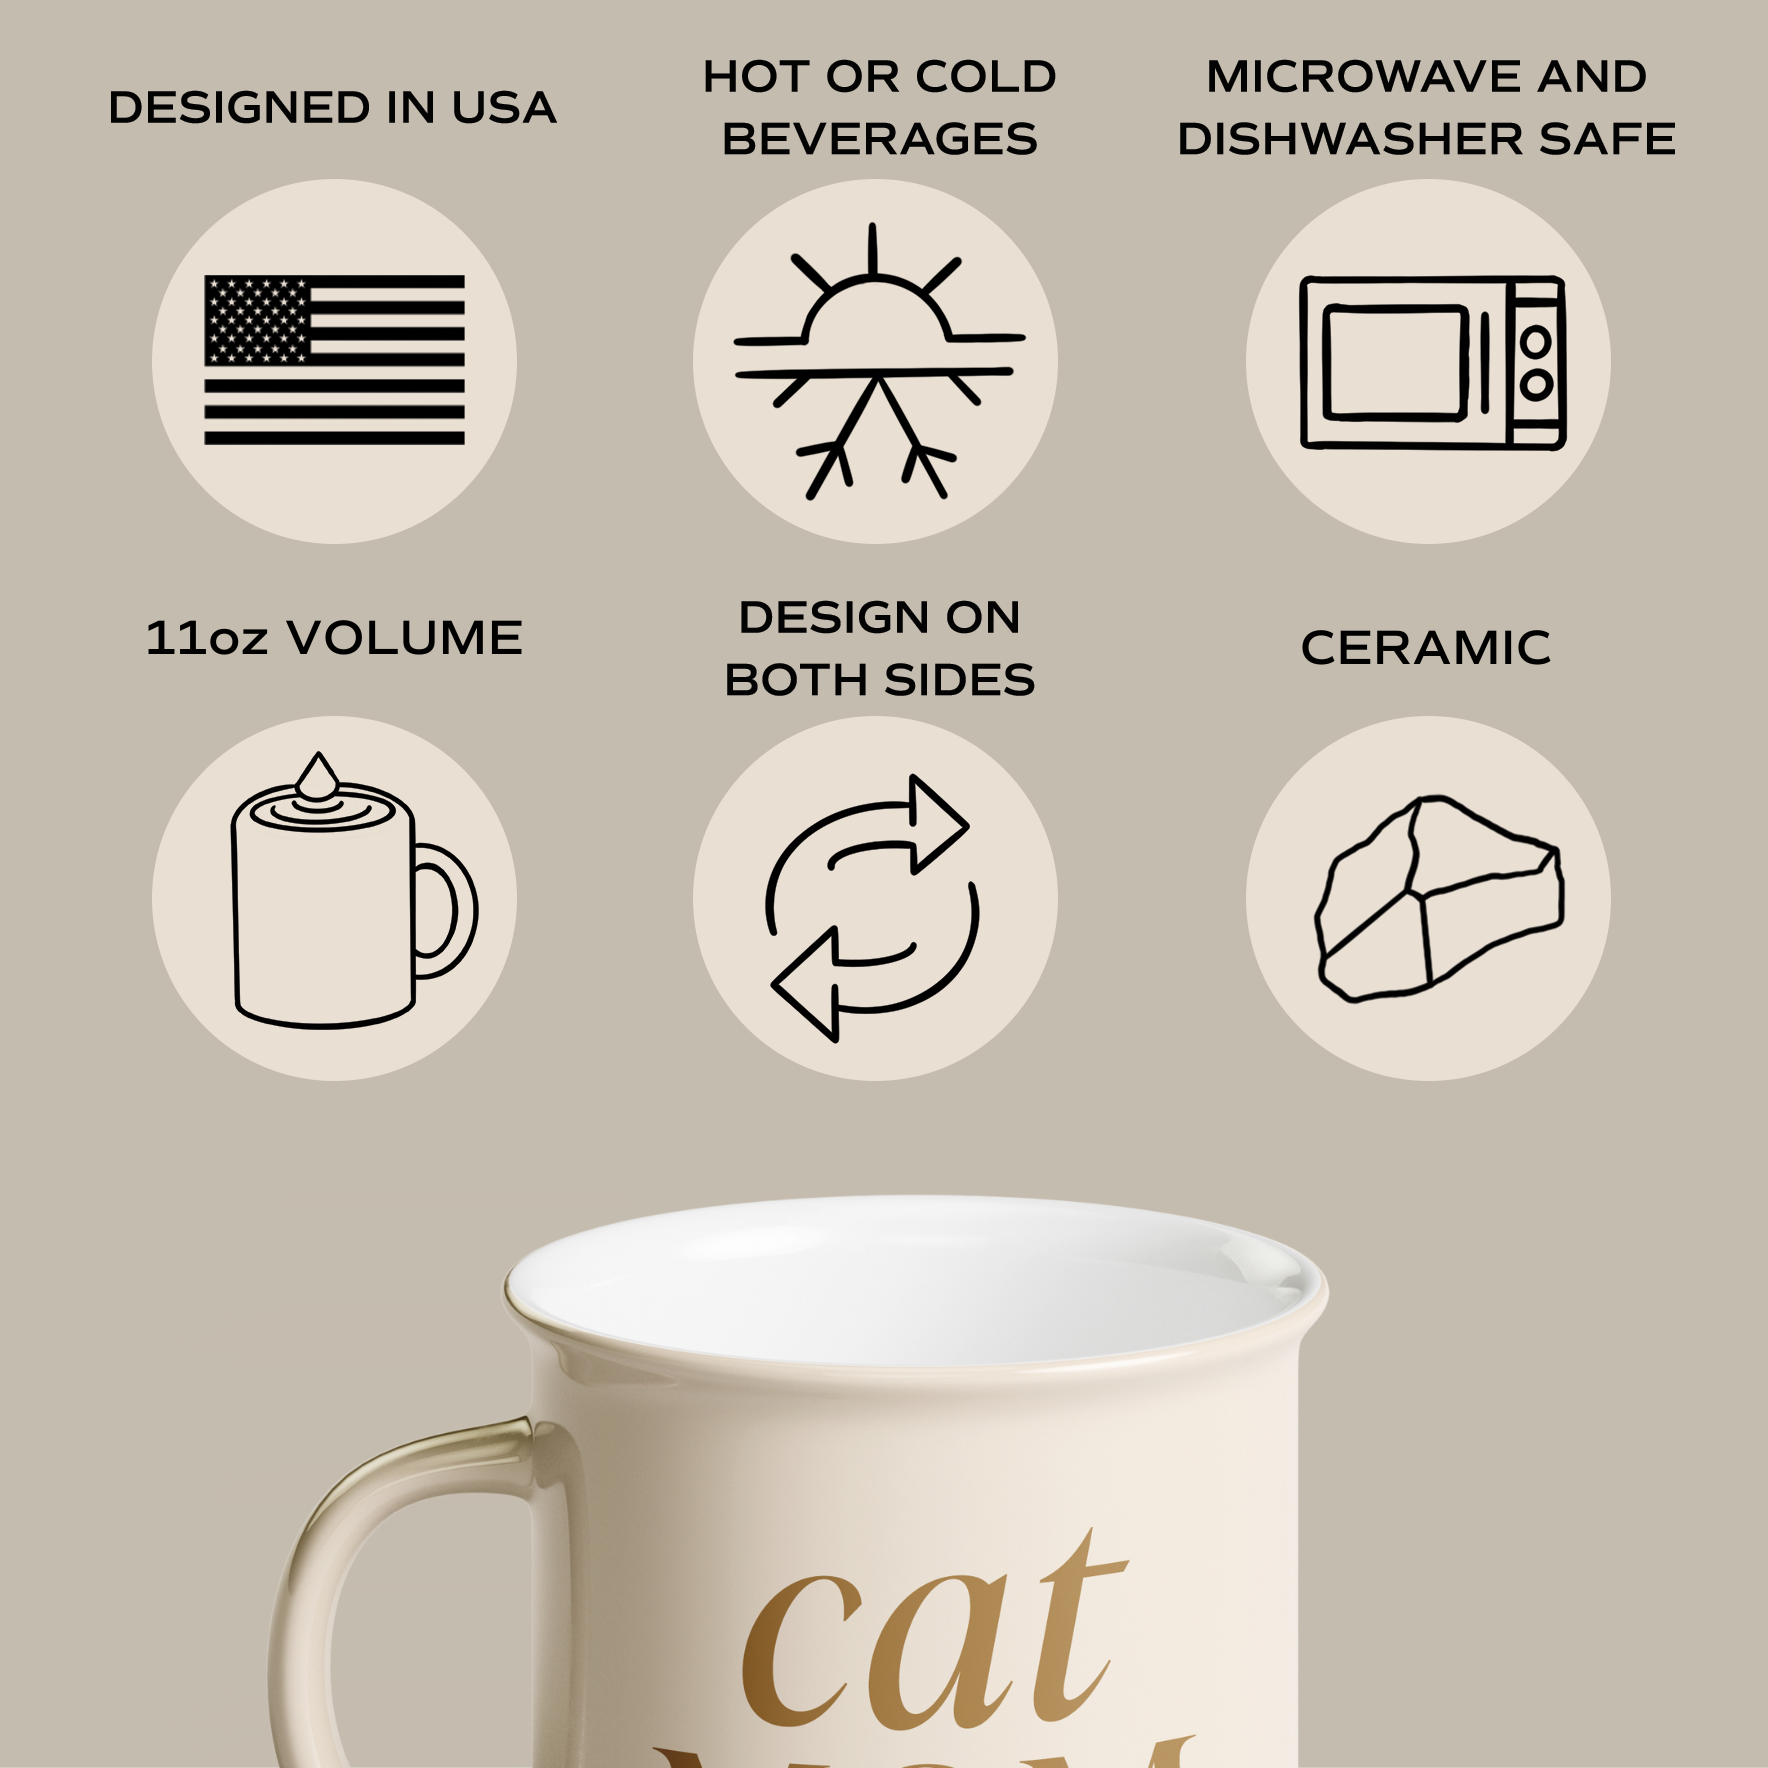 Cat Mom 11 oz Campfire Coffee Mug - Home Decor & Gifts-Sweet Water Decor--The Twisted Chandelier